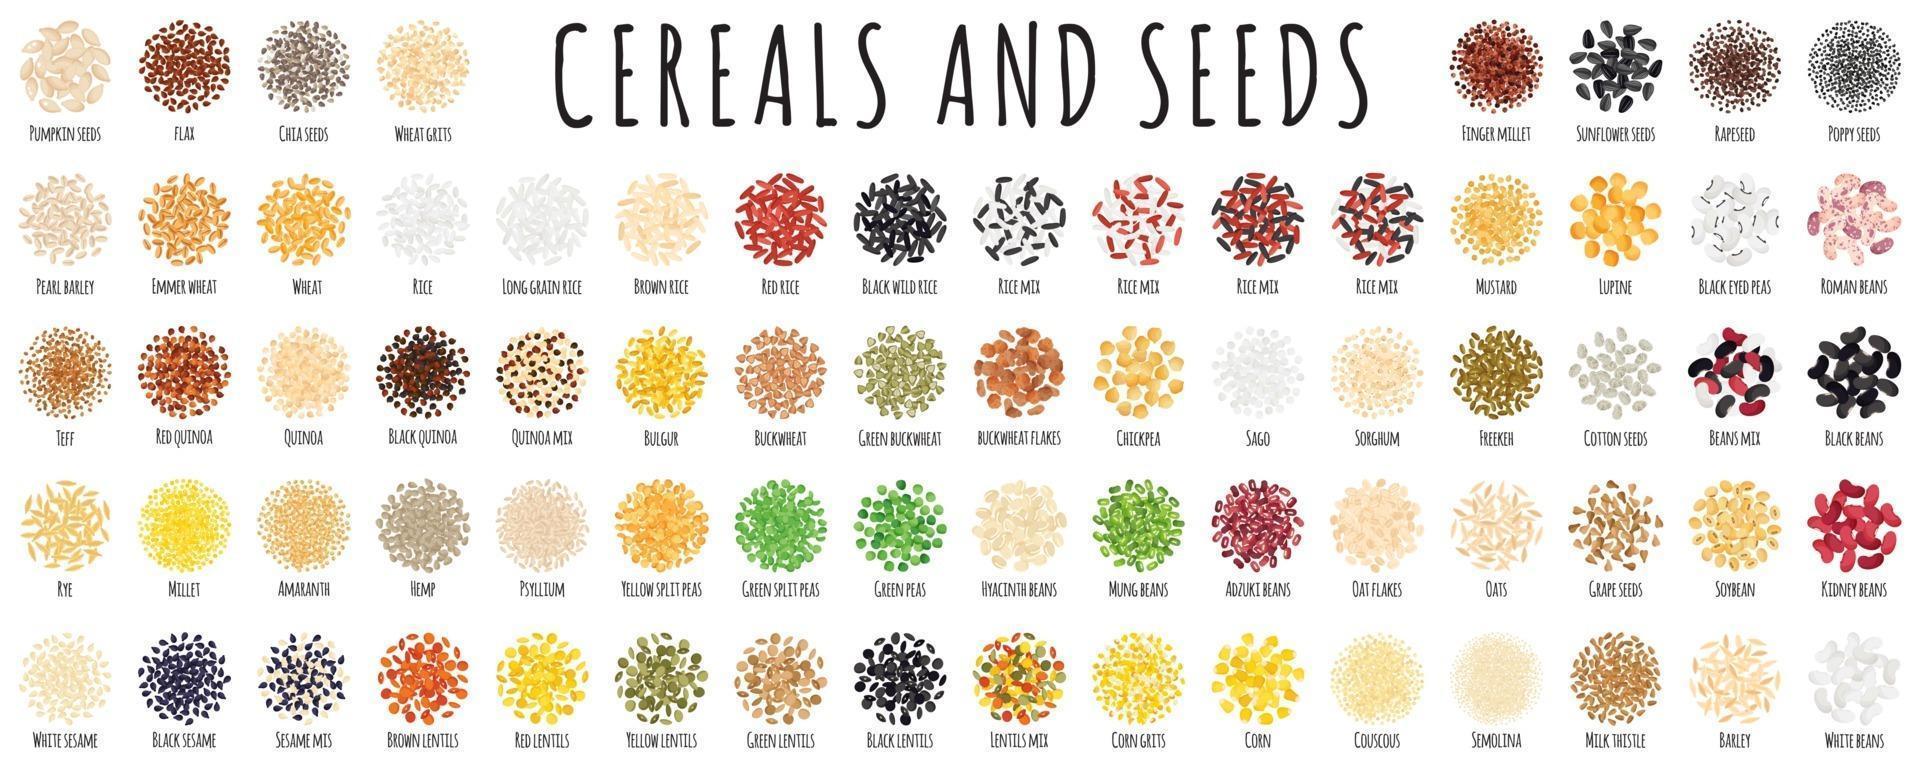 Large healthy cereal and seed set vector